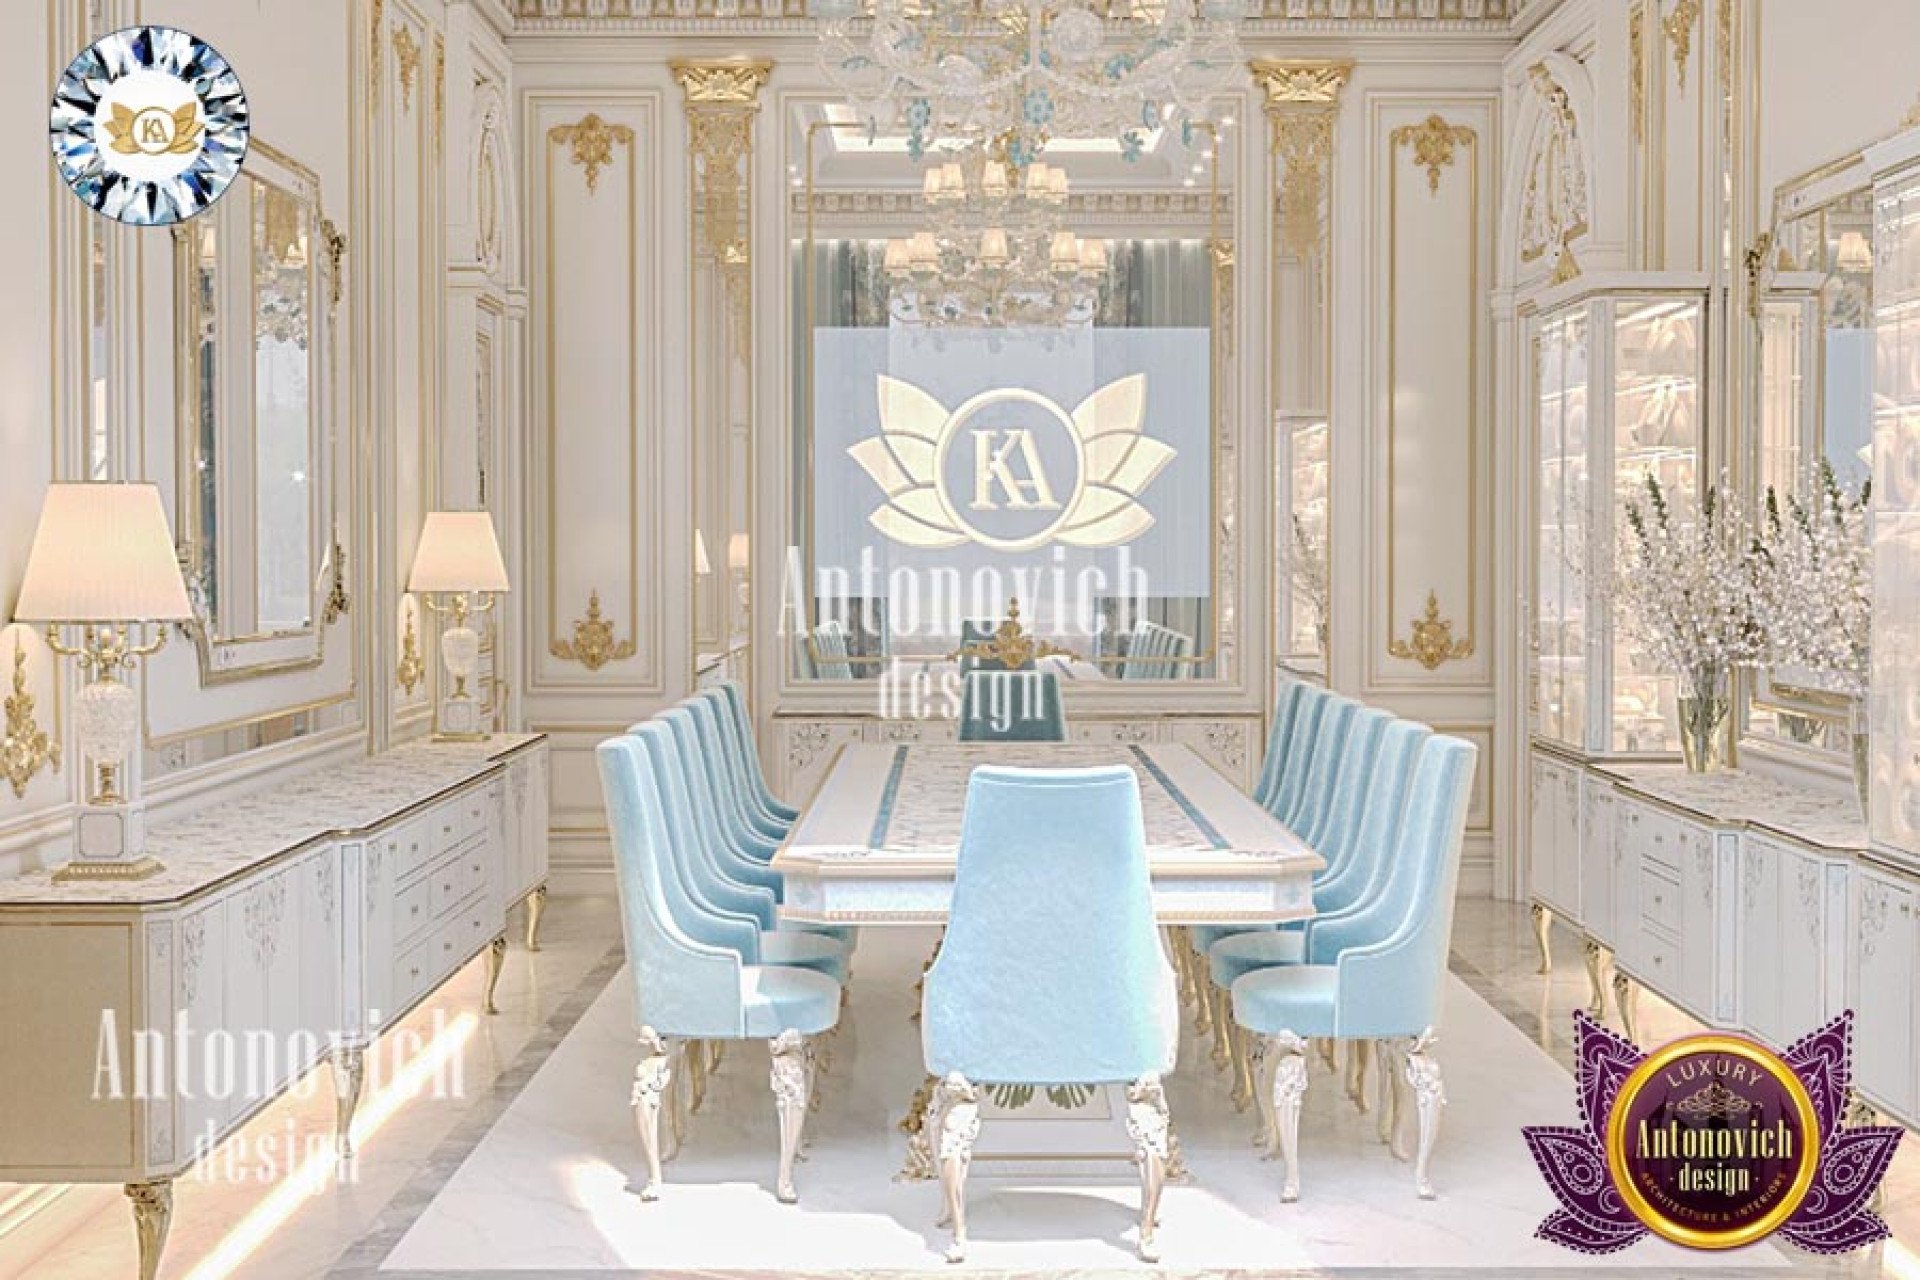 HOW TO SELECT DINING ROOM FURNITURES FOR LUXURY INTERIOR DESIGN?